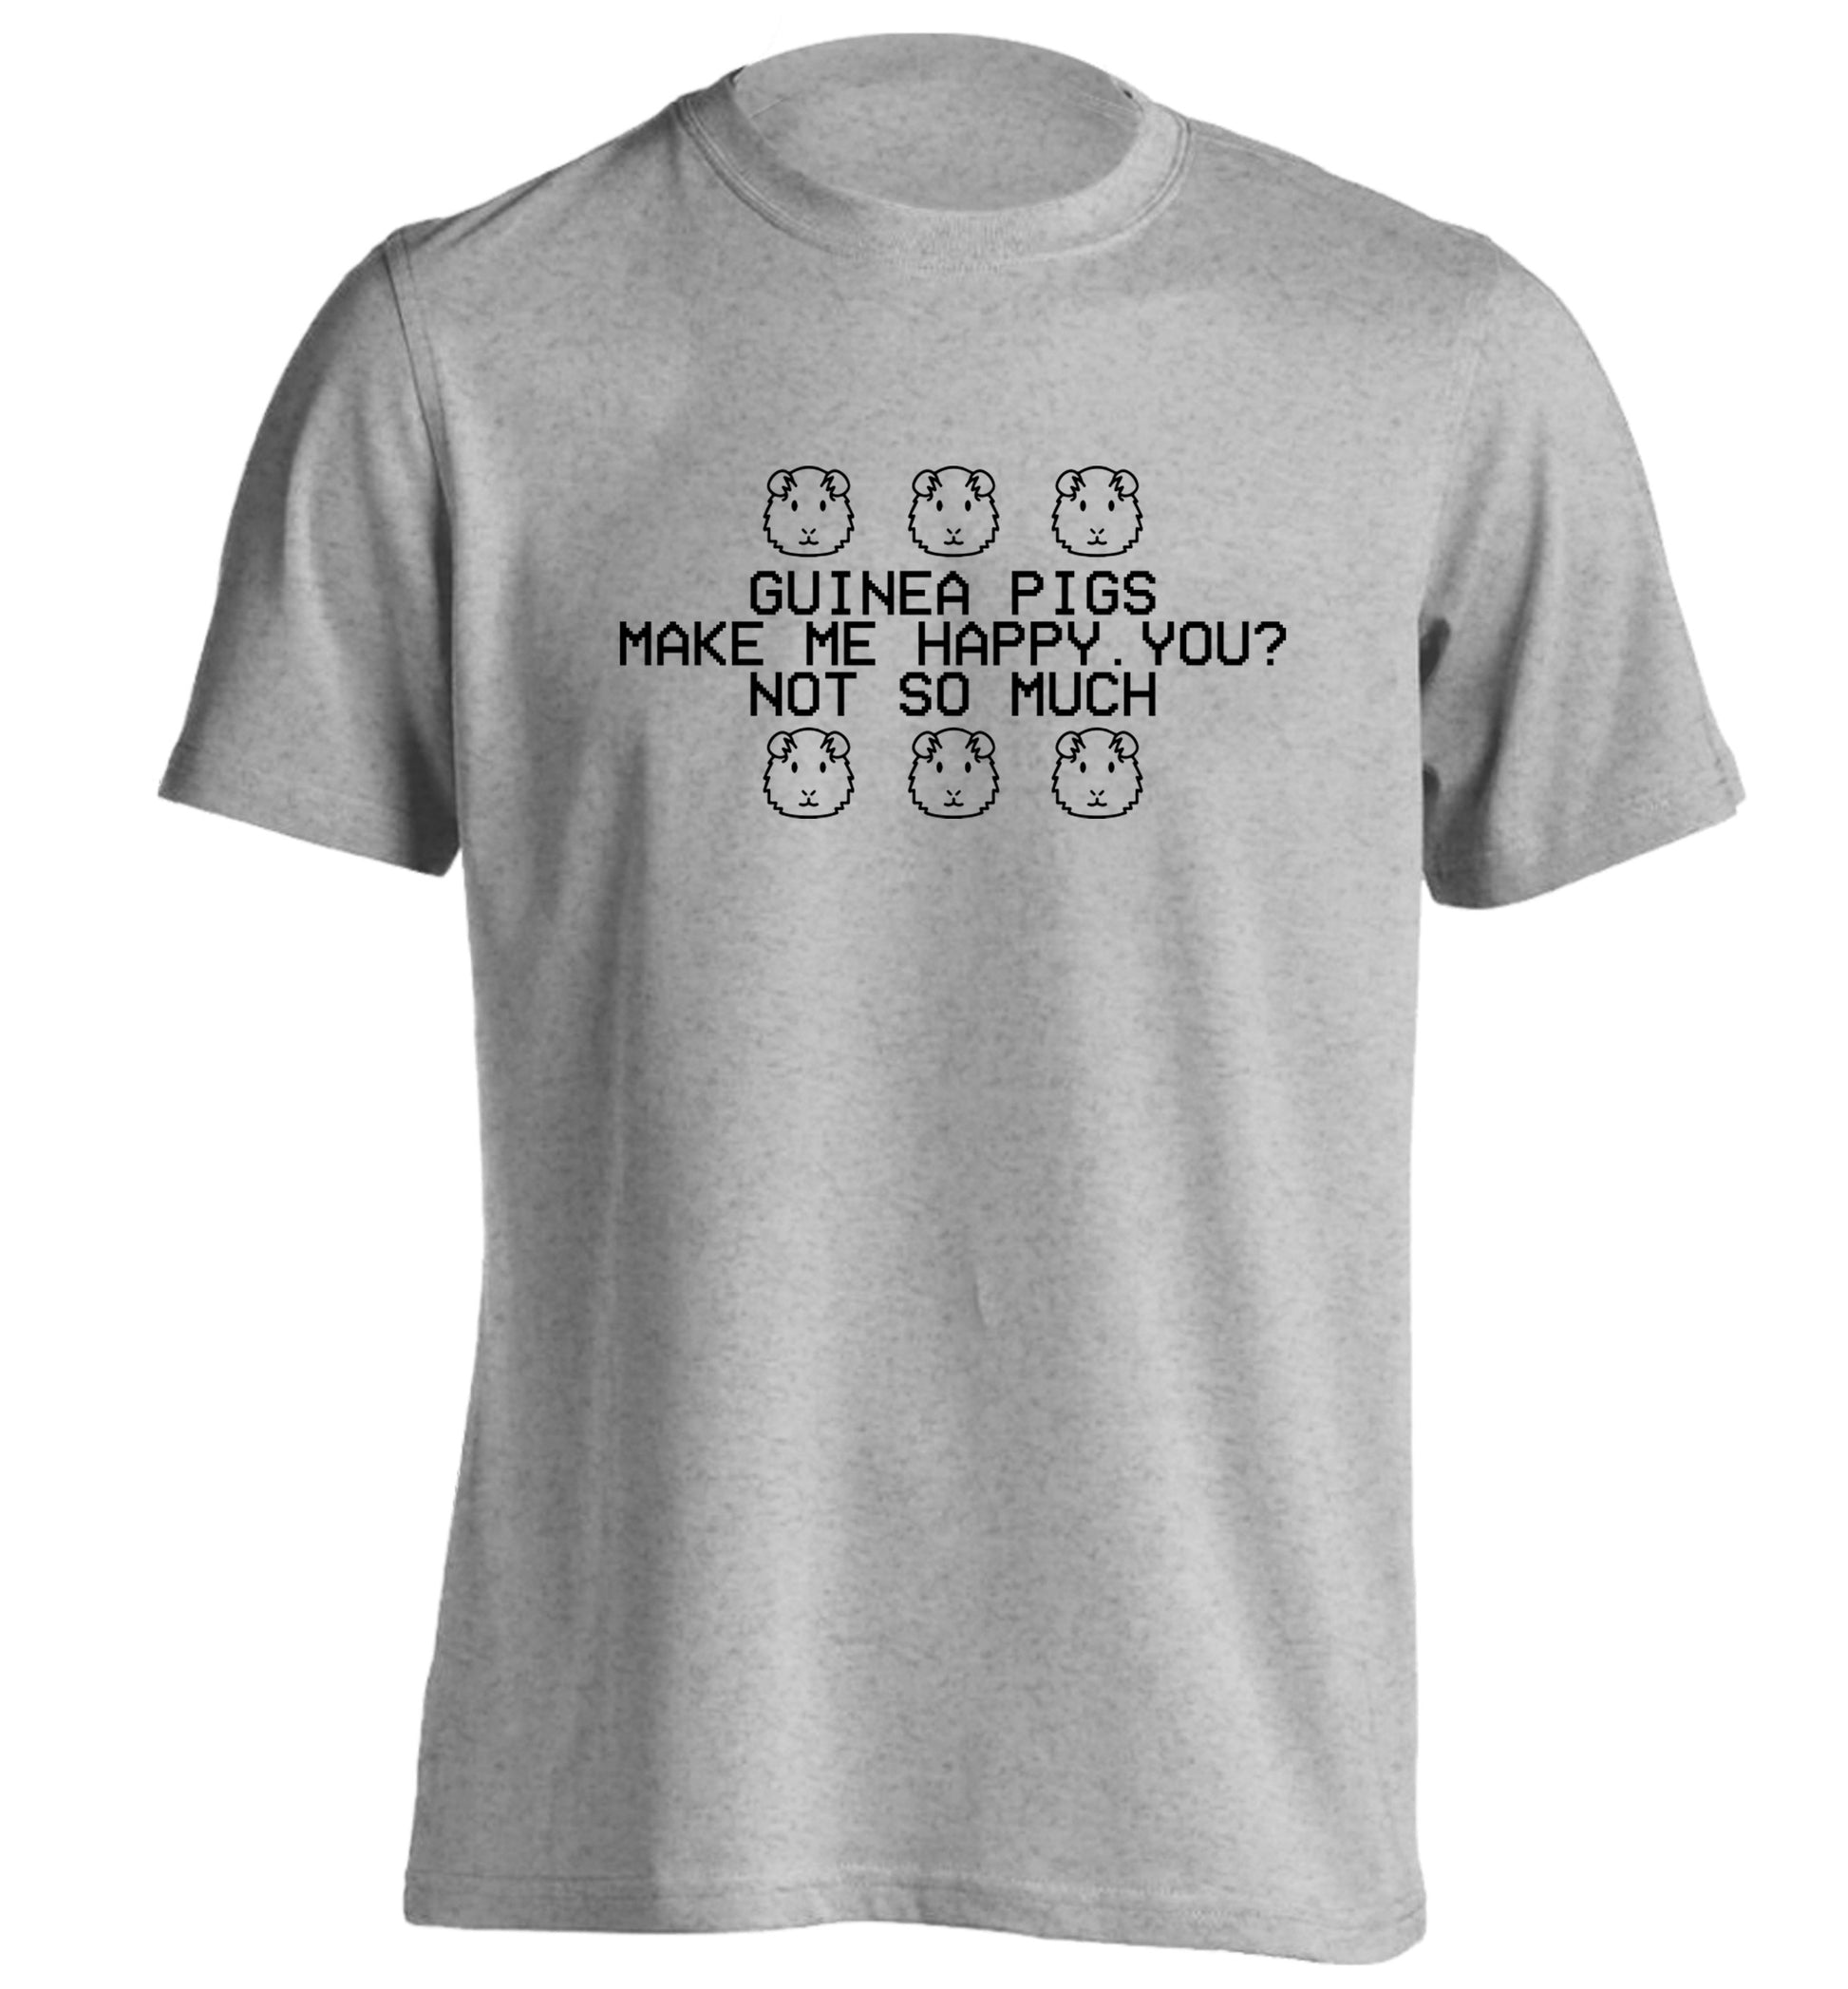 Guinea pigs make me happy, you not so much adults unisex grey Tshirt 2XL